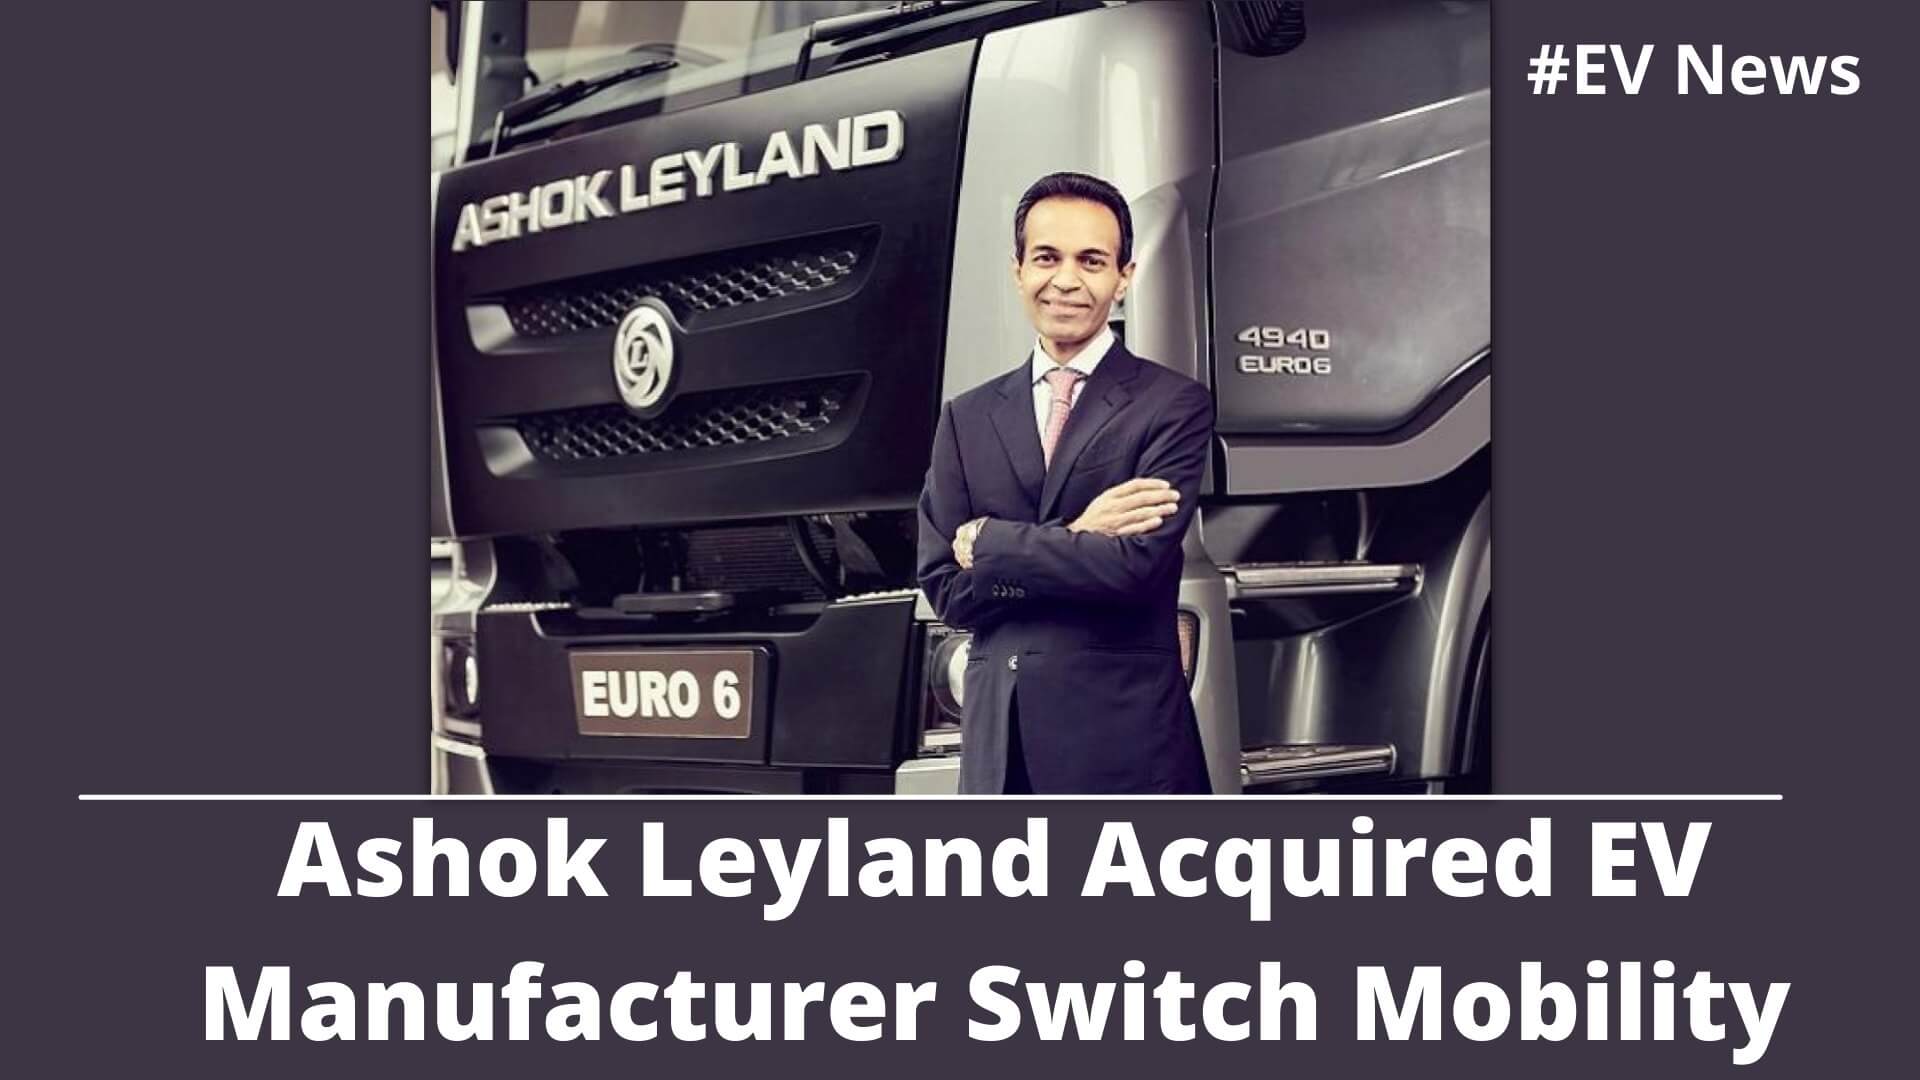 https://e-vehicleinfo.com/ashok-leyland-acquired-ev-manufacturer-switch-mobility/